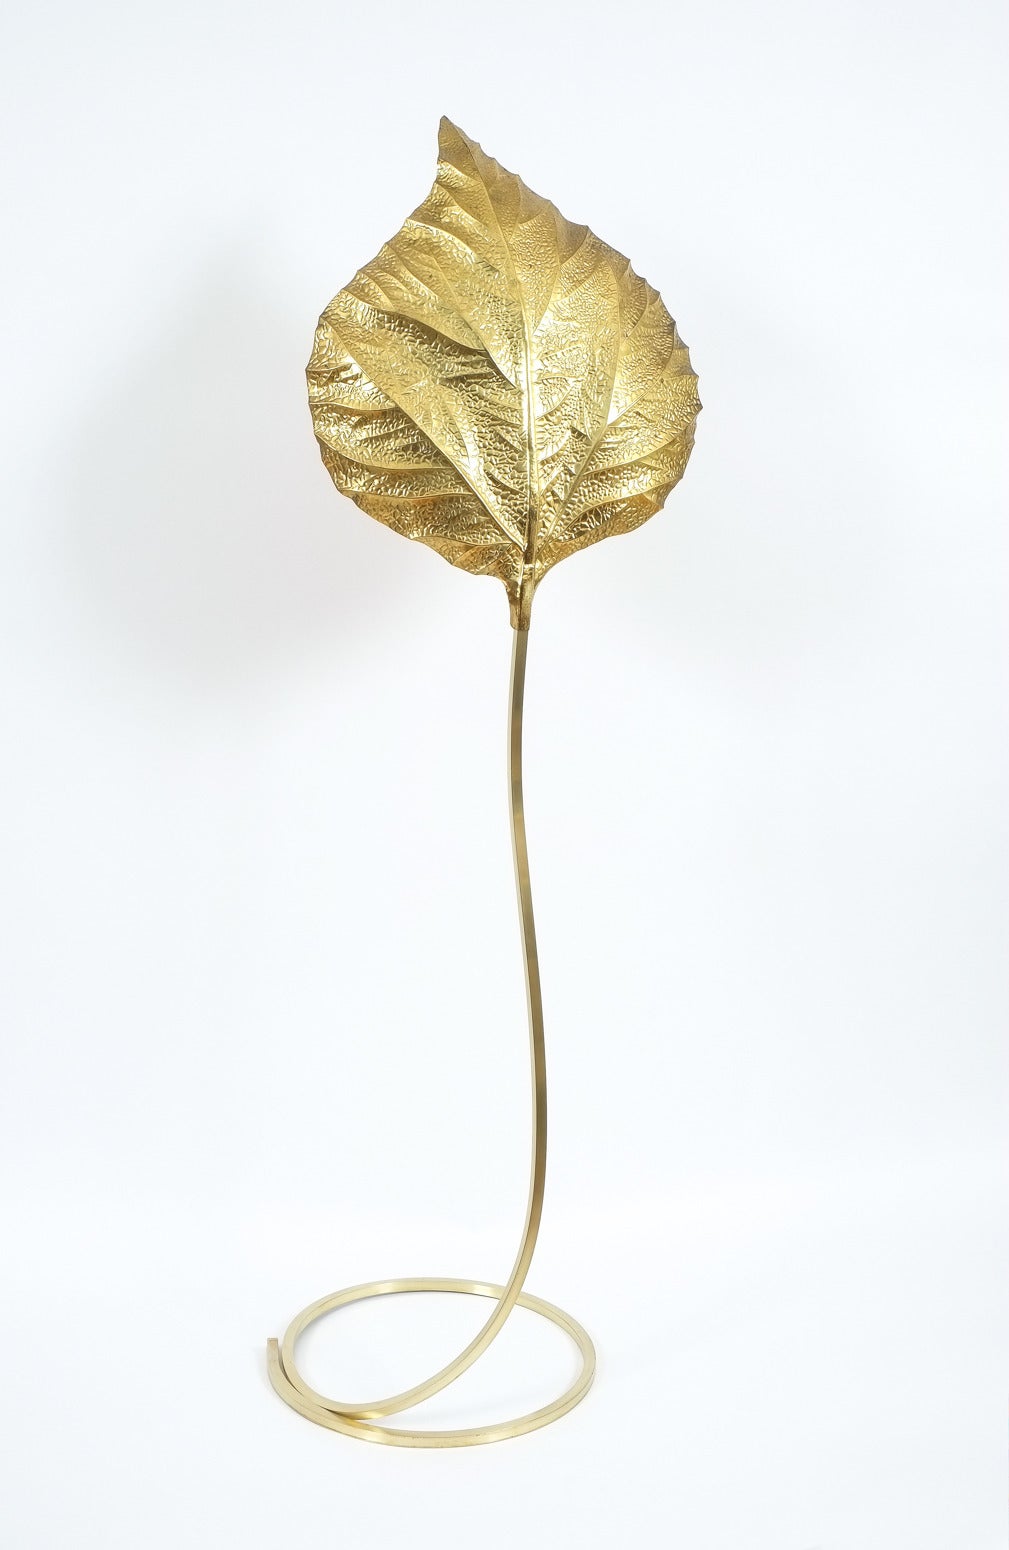 Elegant Tommaso Barbi brass rhubarb leaf floor lamp from 1970s, Italy.
The twisted shiny brass foot has been restored (sanded/polished); the light holds one single bulb with 100W max and has been newly rewired. It is in excellent condition, the